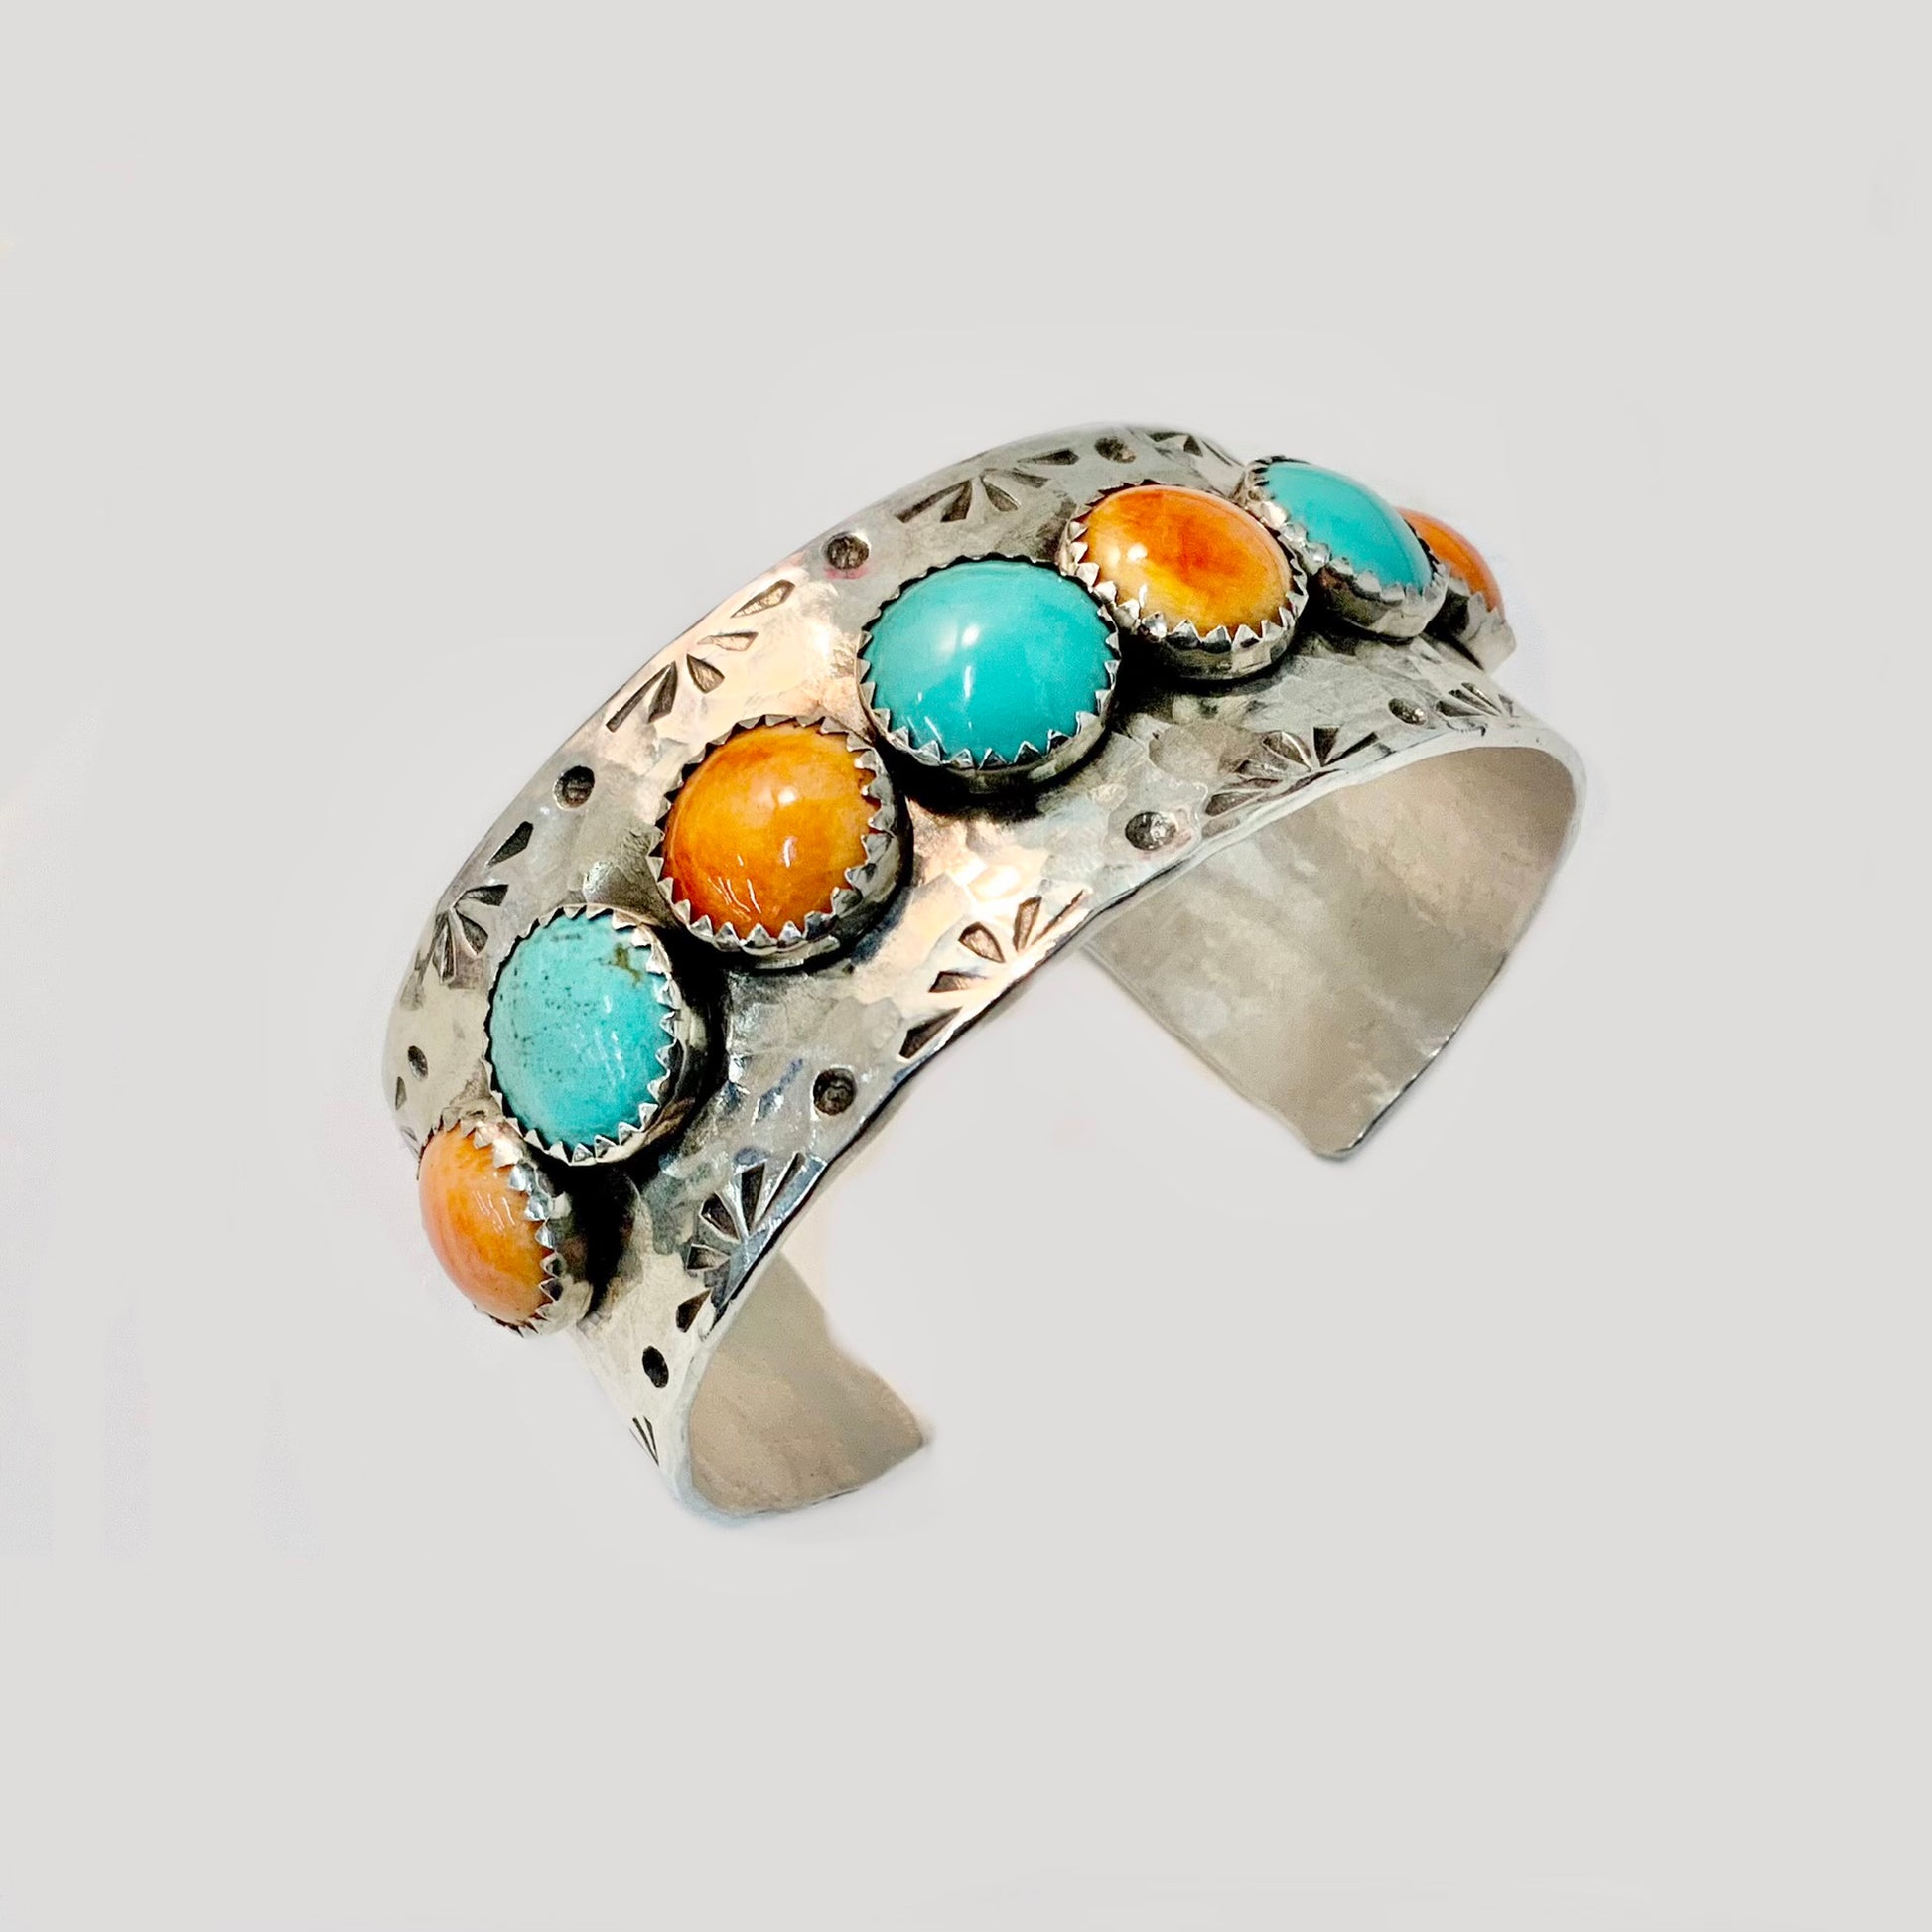 1" Turquoise & Spiny Oyster Stamped Sterling Cuff Cuffs Richard Schmidt   